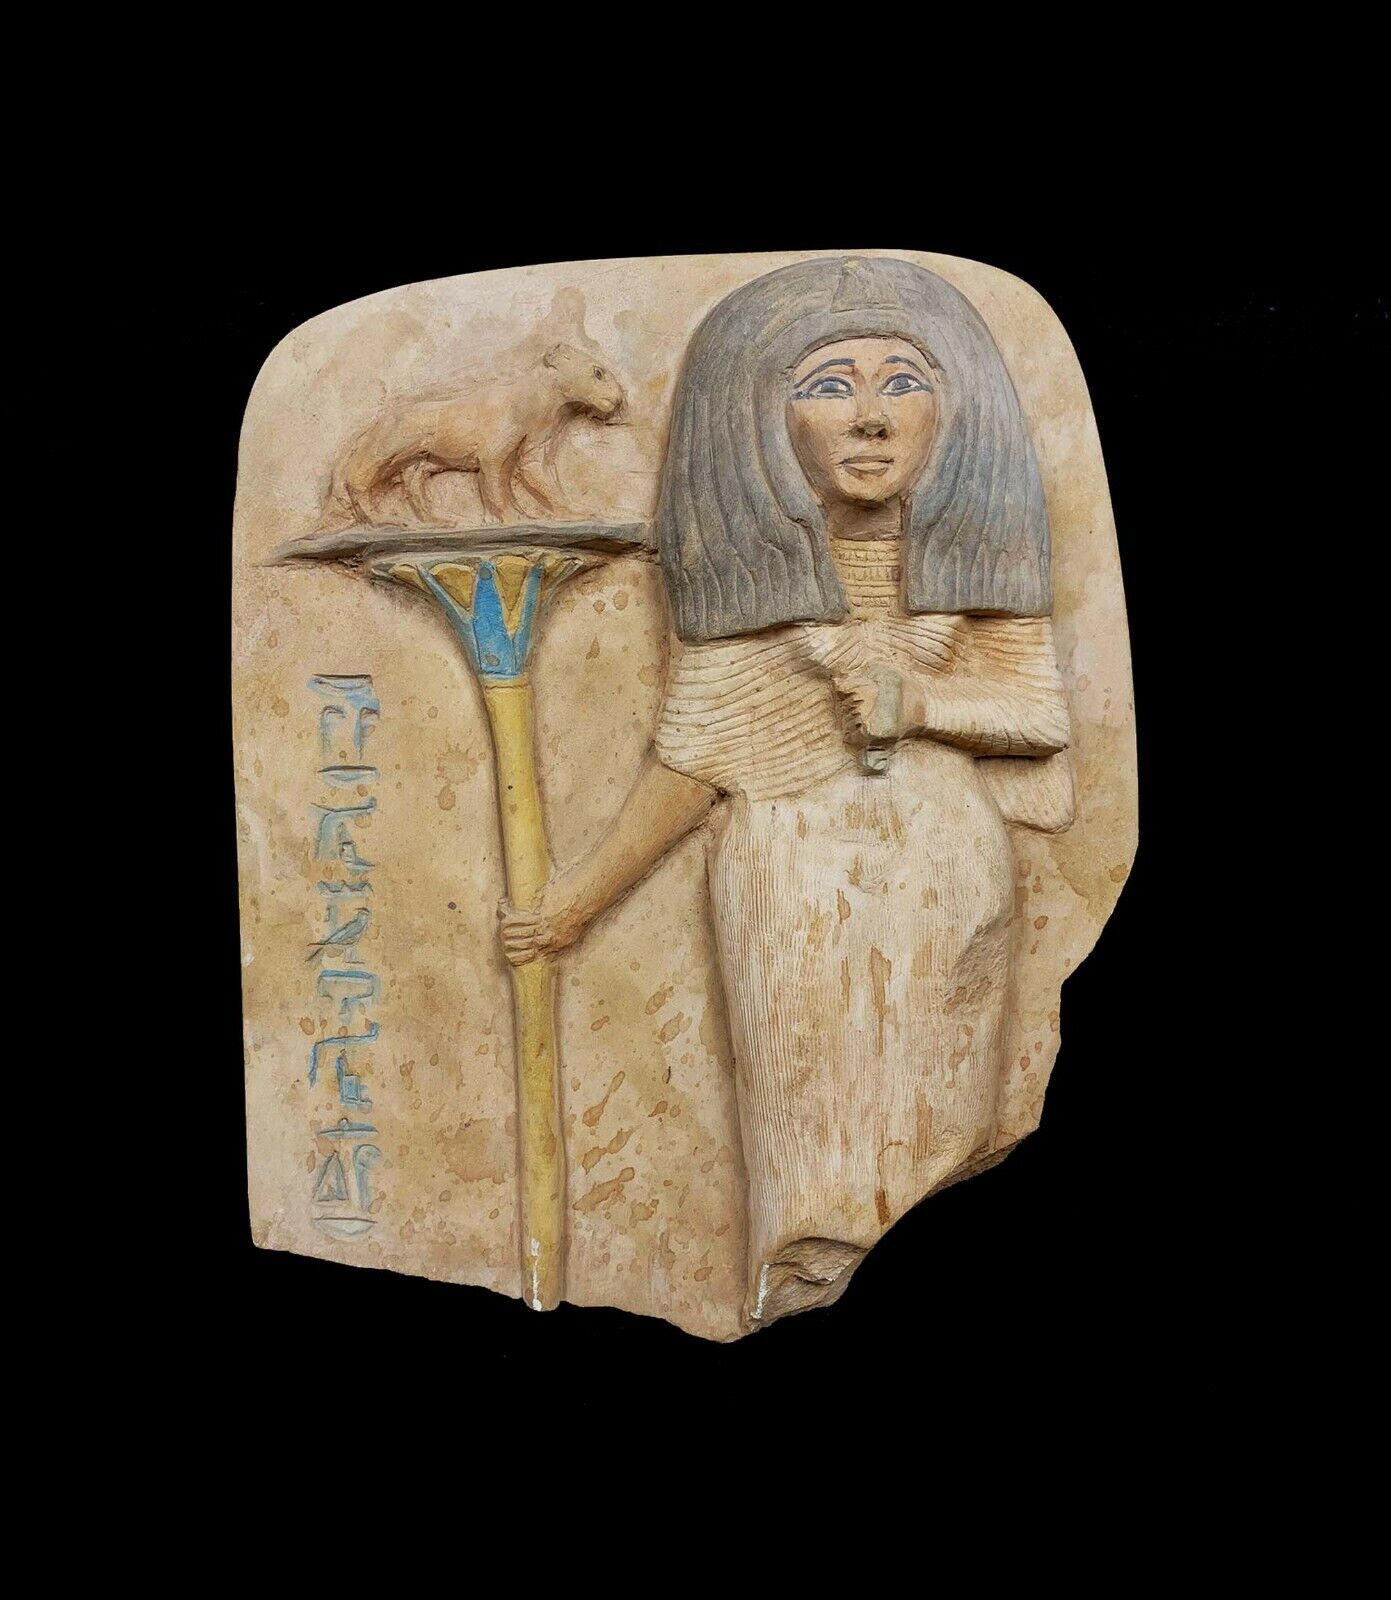 Marvelous Queen HATSHEPSUT ( AMUN's Wife ) with the Egyptian lion